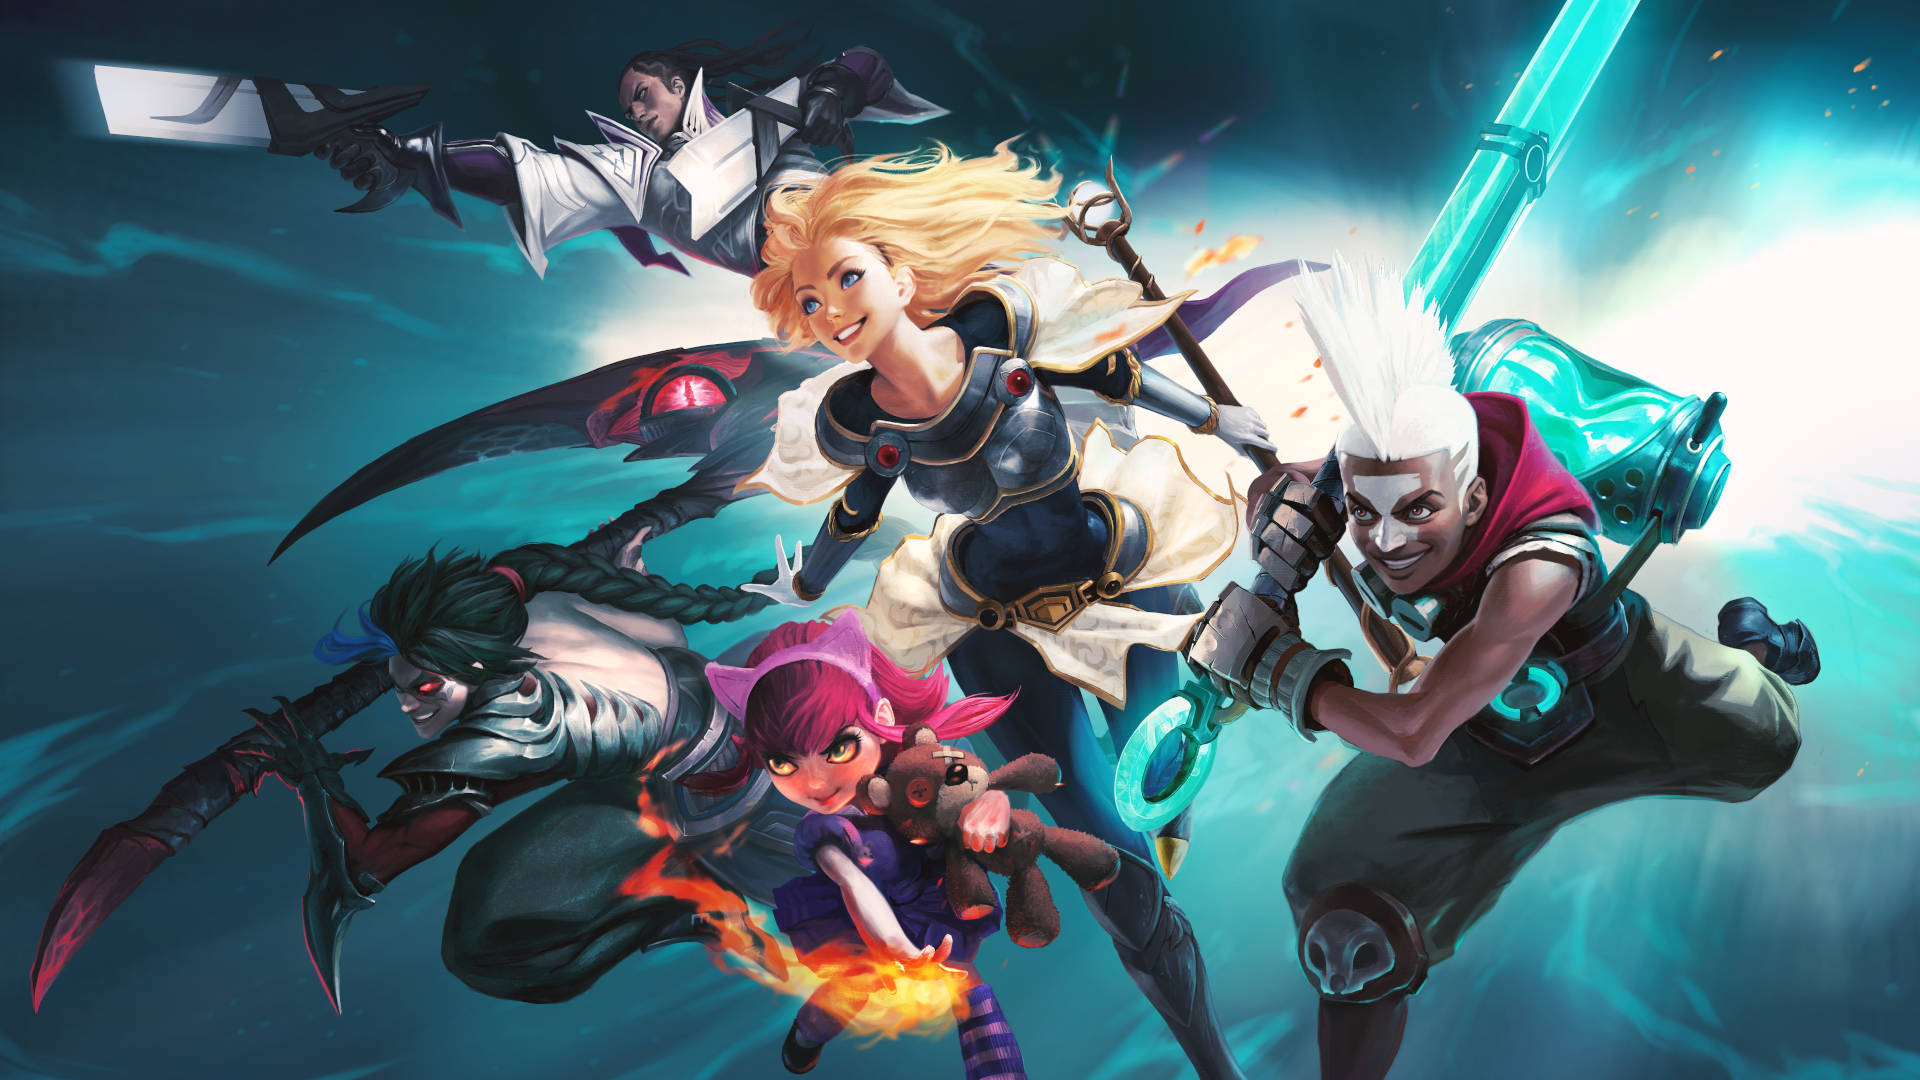 League of Legends System Requirements 2023